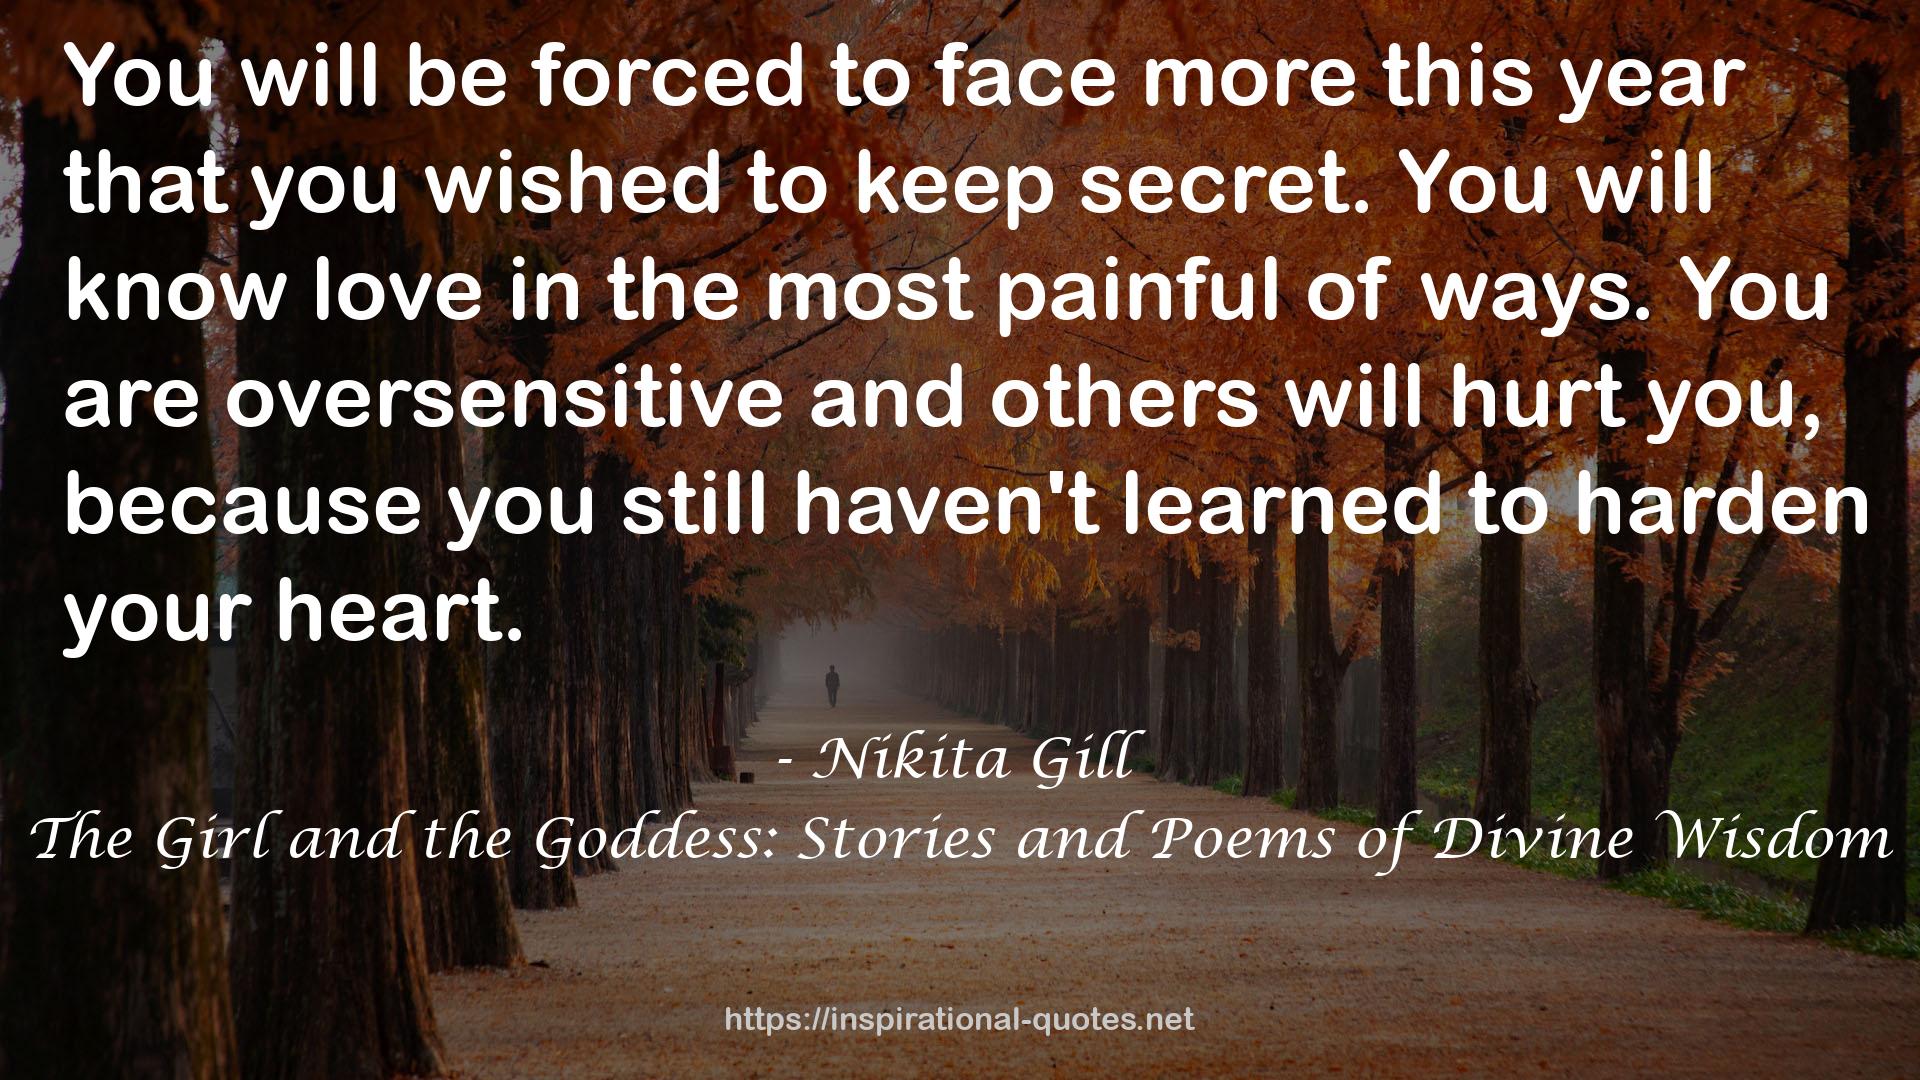 The Girl and the Goddess: Stories and Poems of Divine Wisdom QUOTES